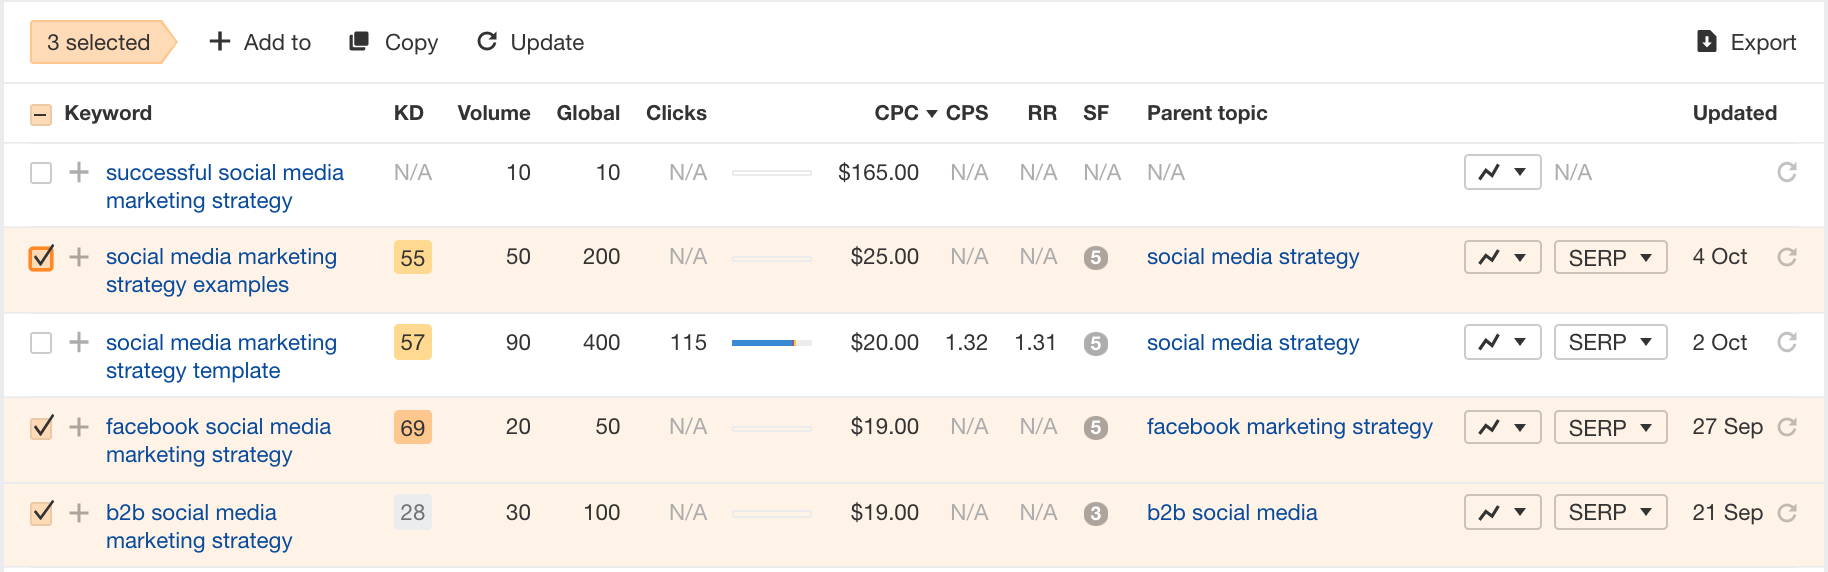 Finding related keywords in Ahrefs.